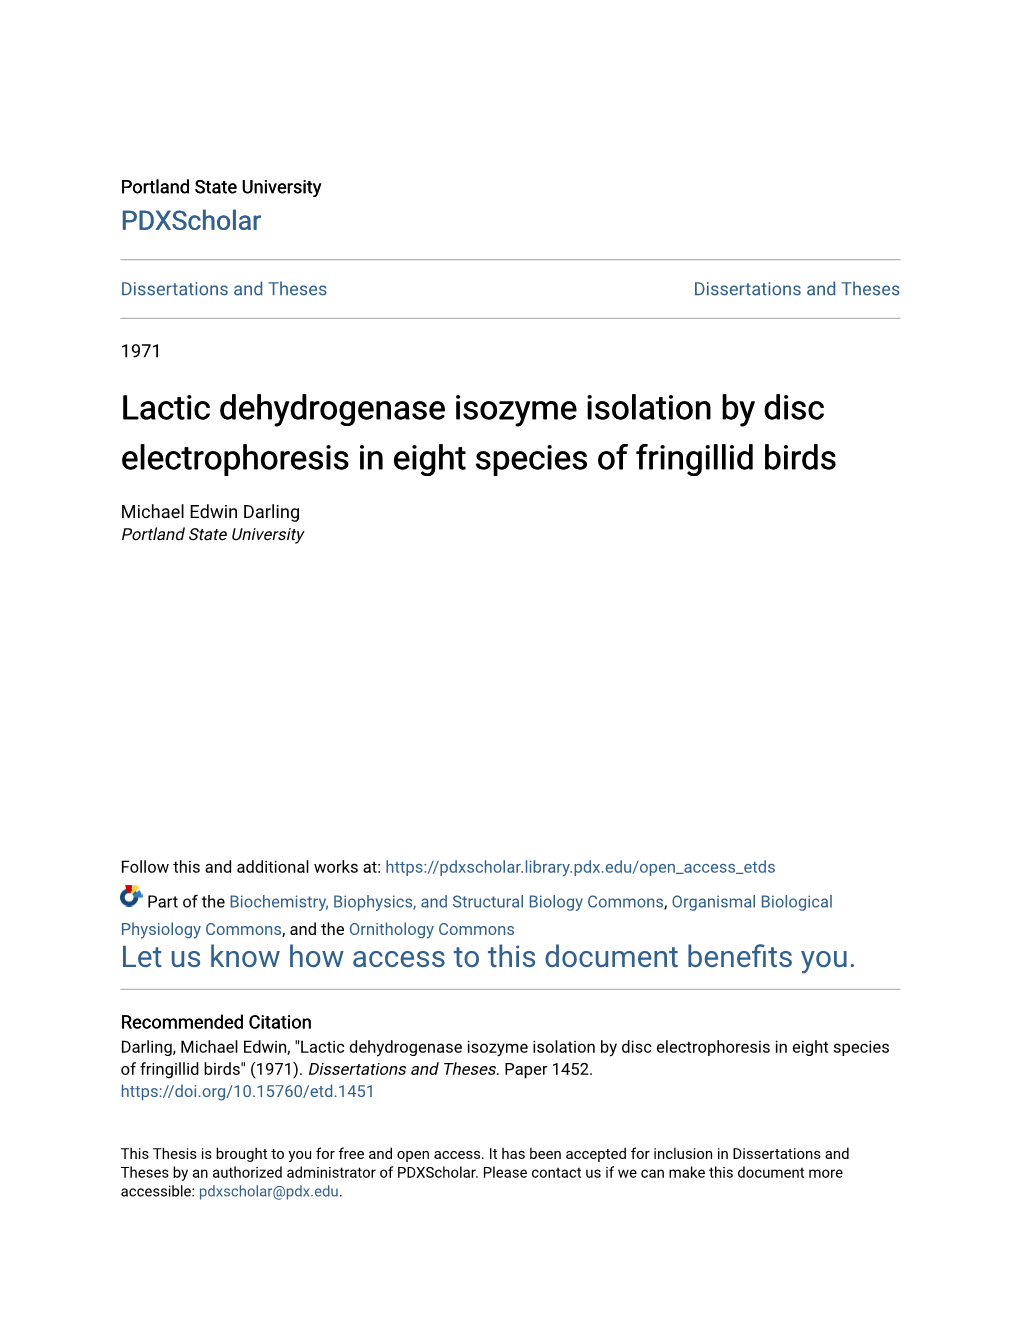 Lactic Dehydrogenase Isozyme Isolation by Disc Electrophoresis in Eight Species of Fringillid Birds